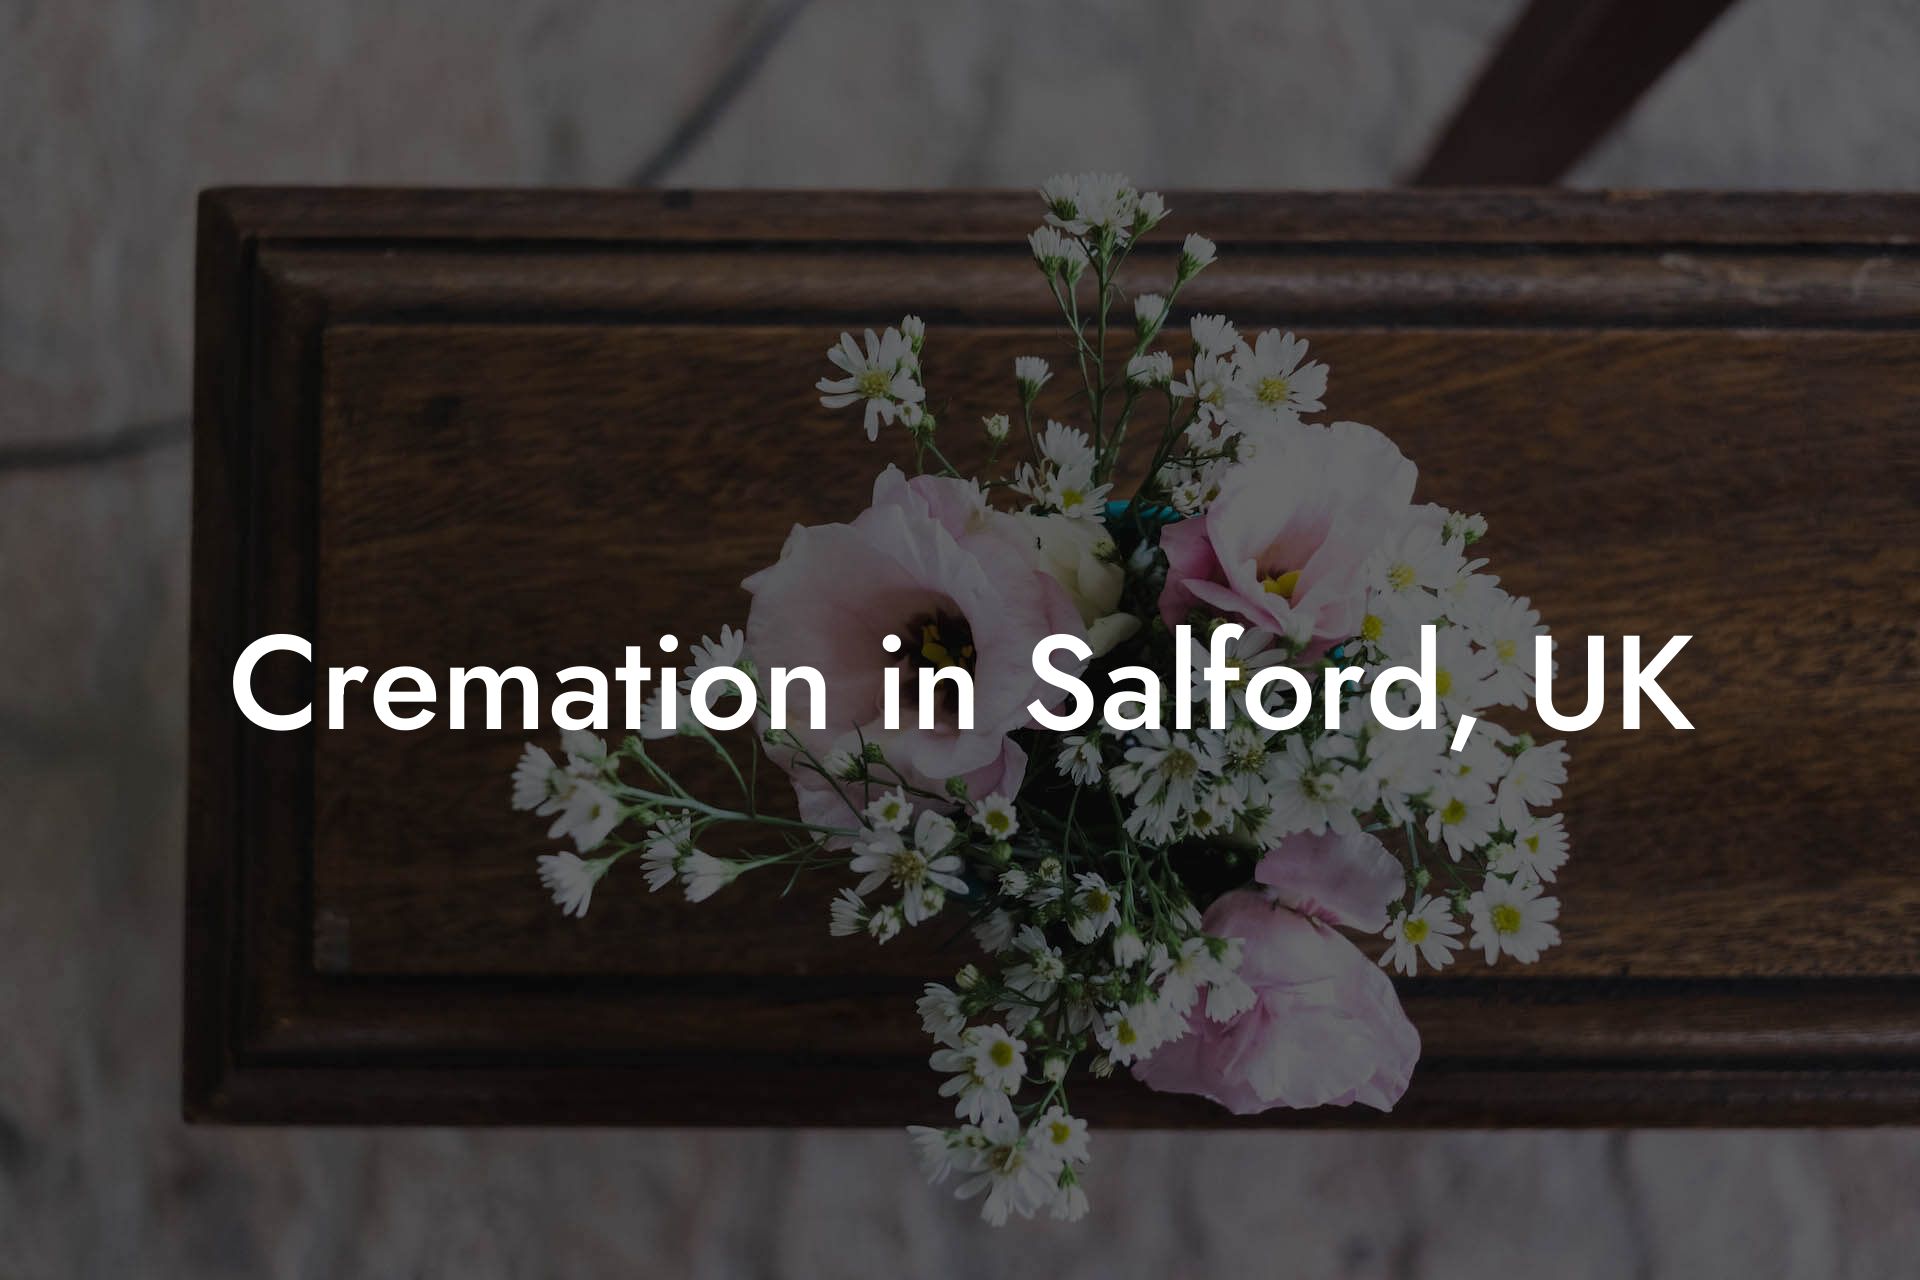 Cremation in Salford, UK